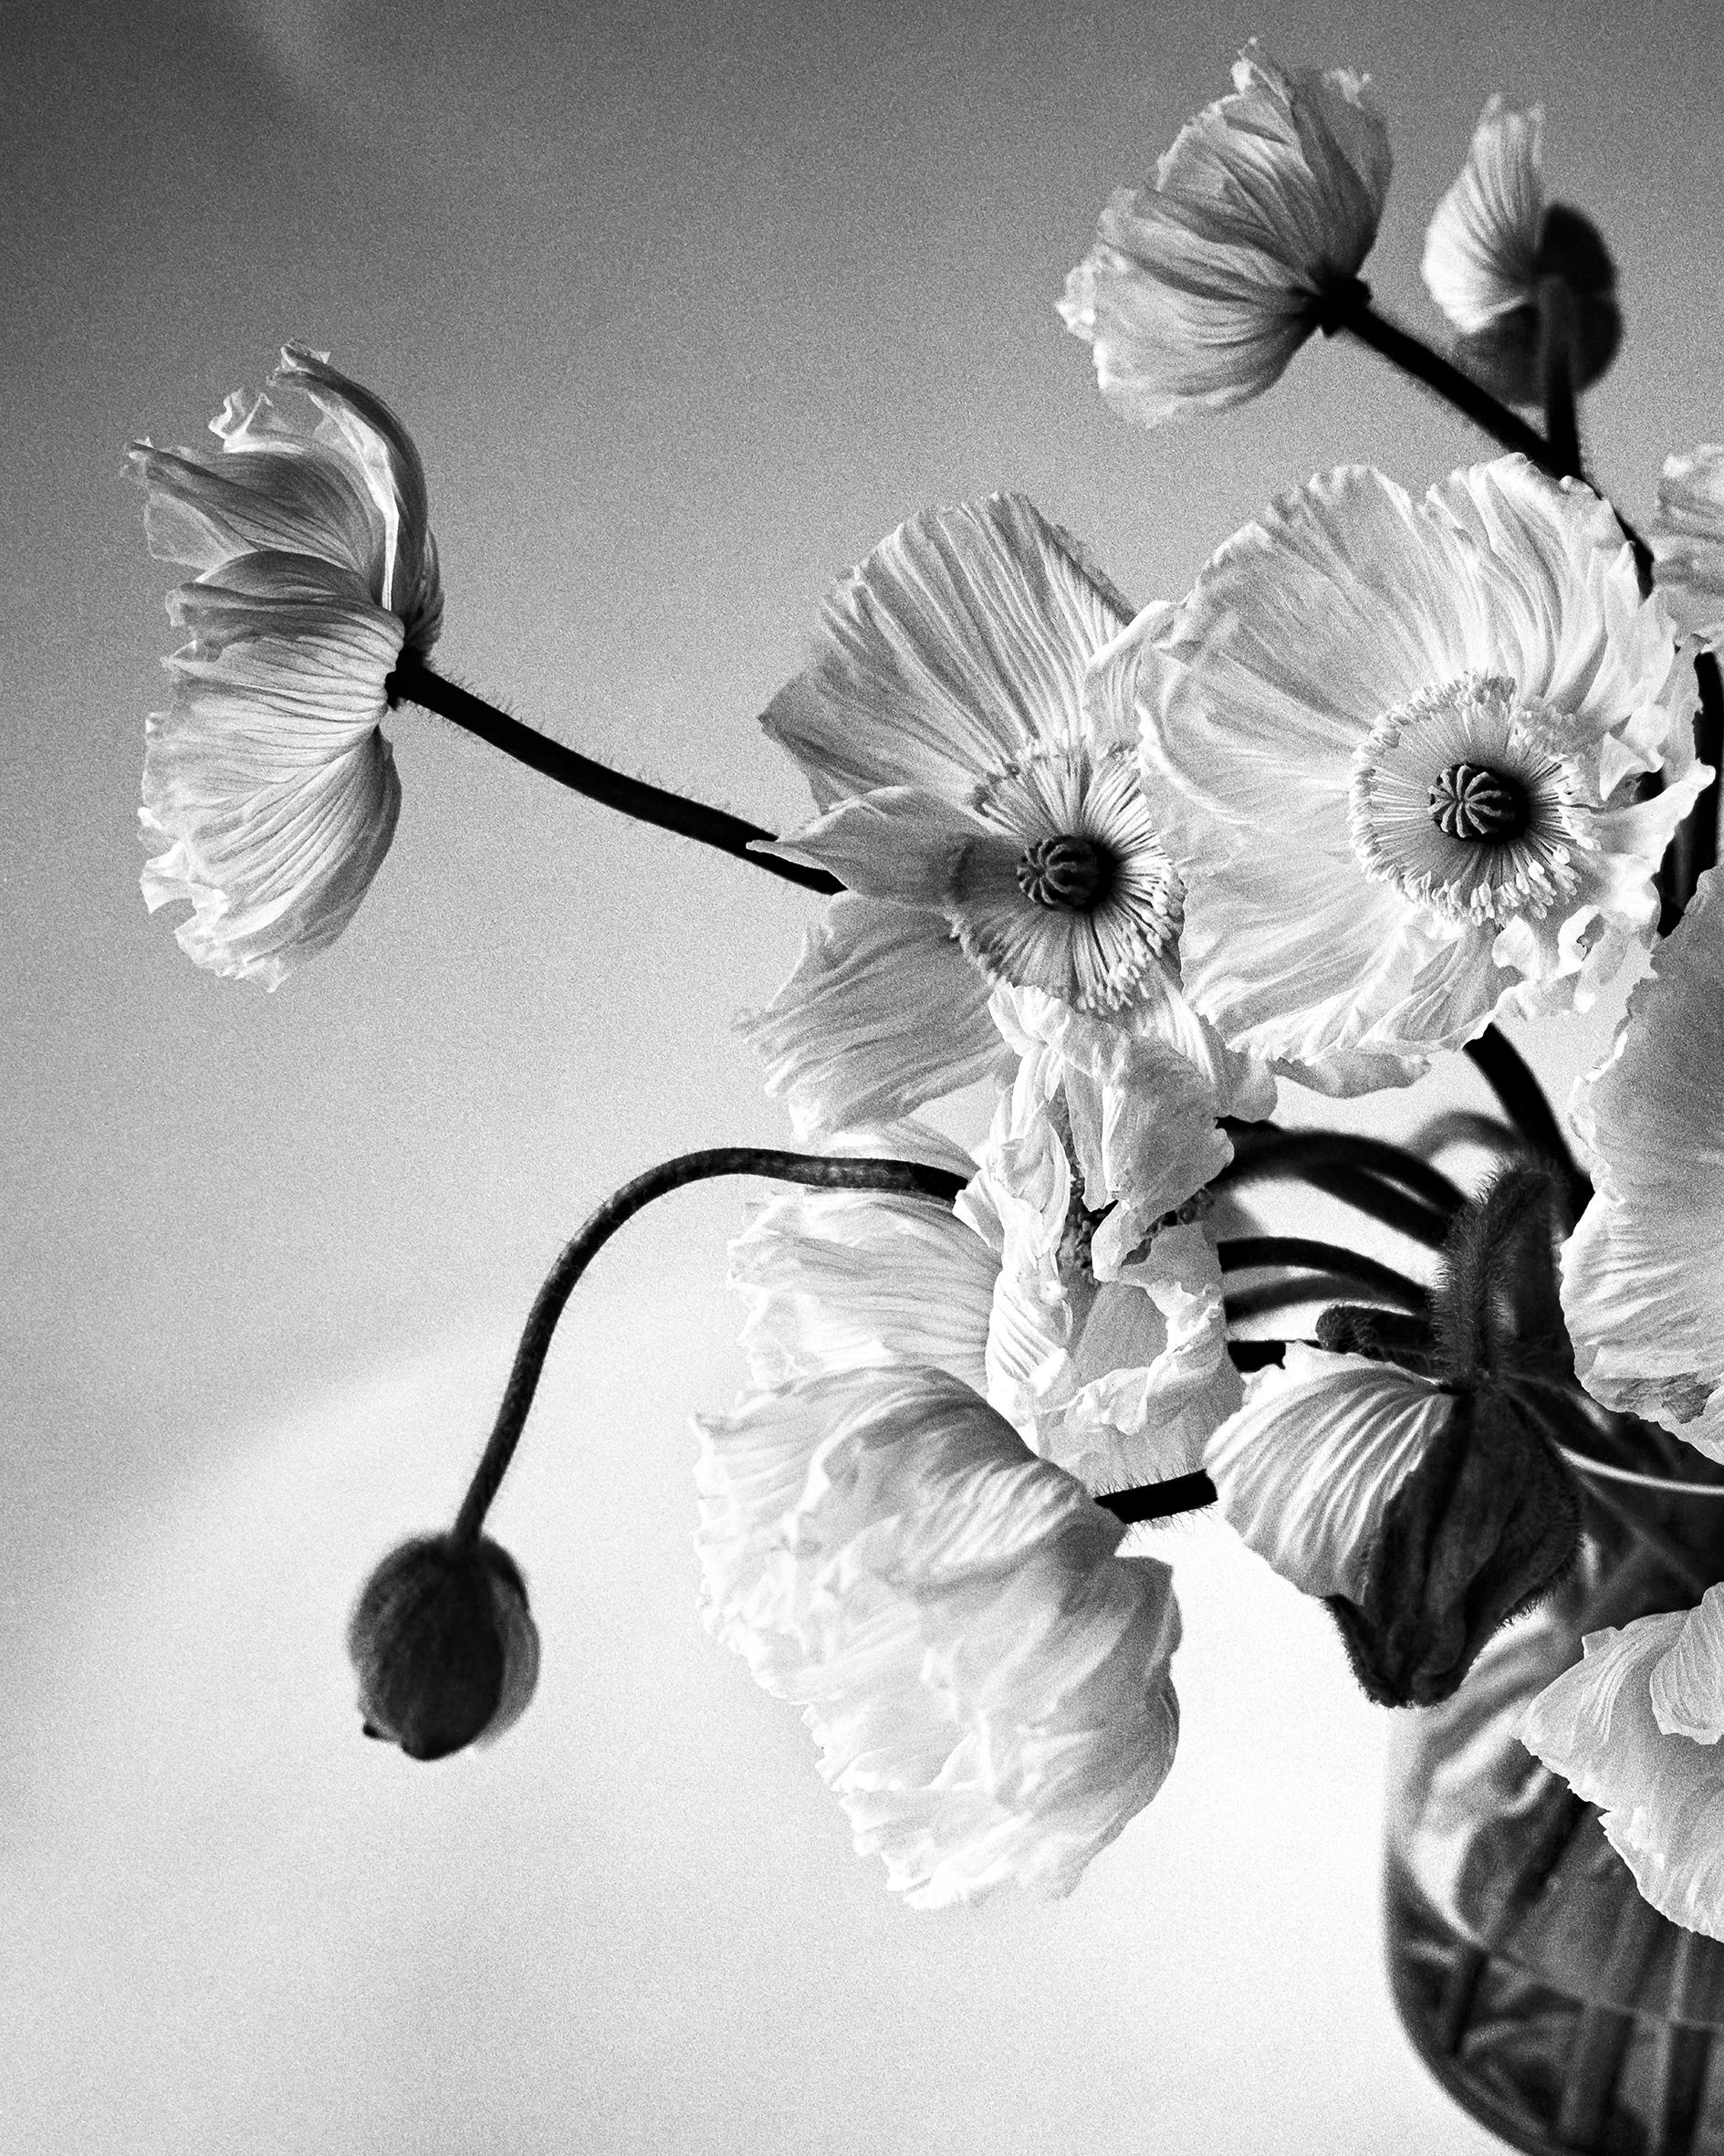 Poppy Bunch - Black and White analogue floral photography, Limited edition of 20 - Photograph by Ugne Pouwell